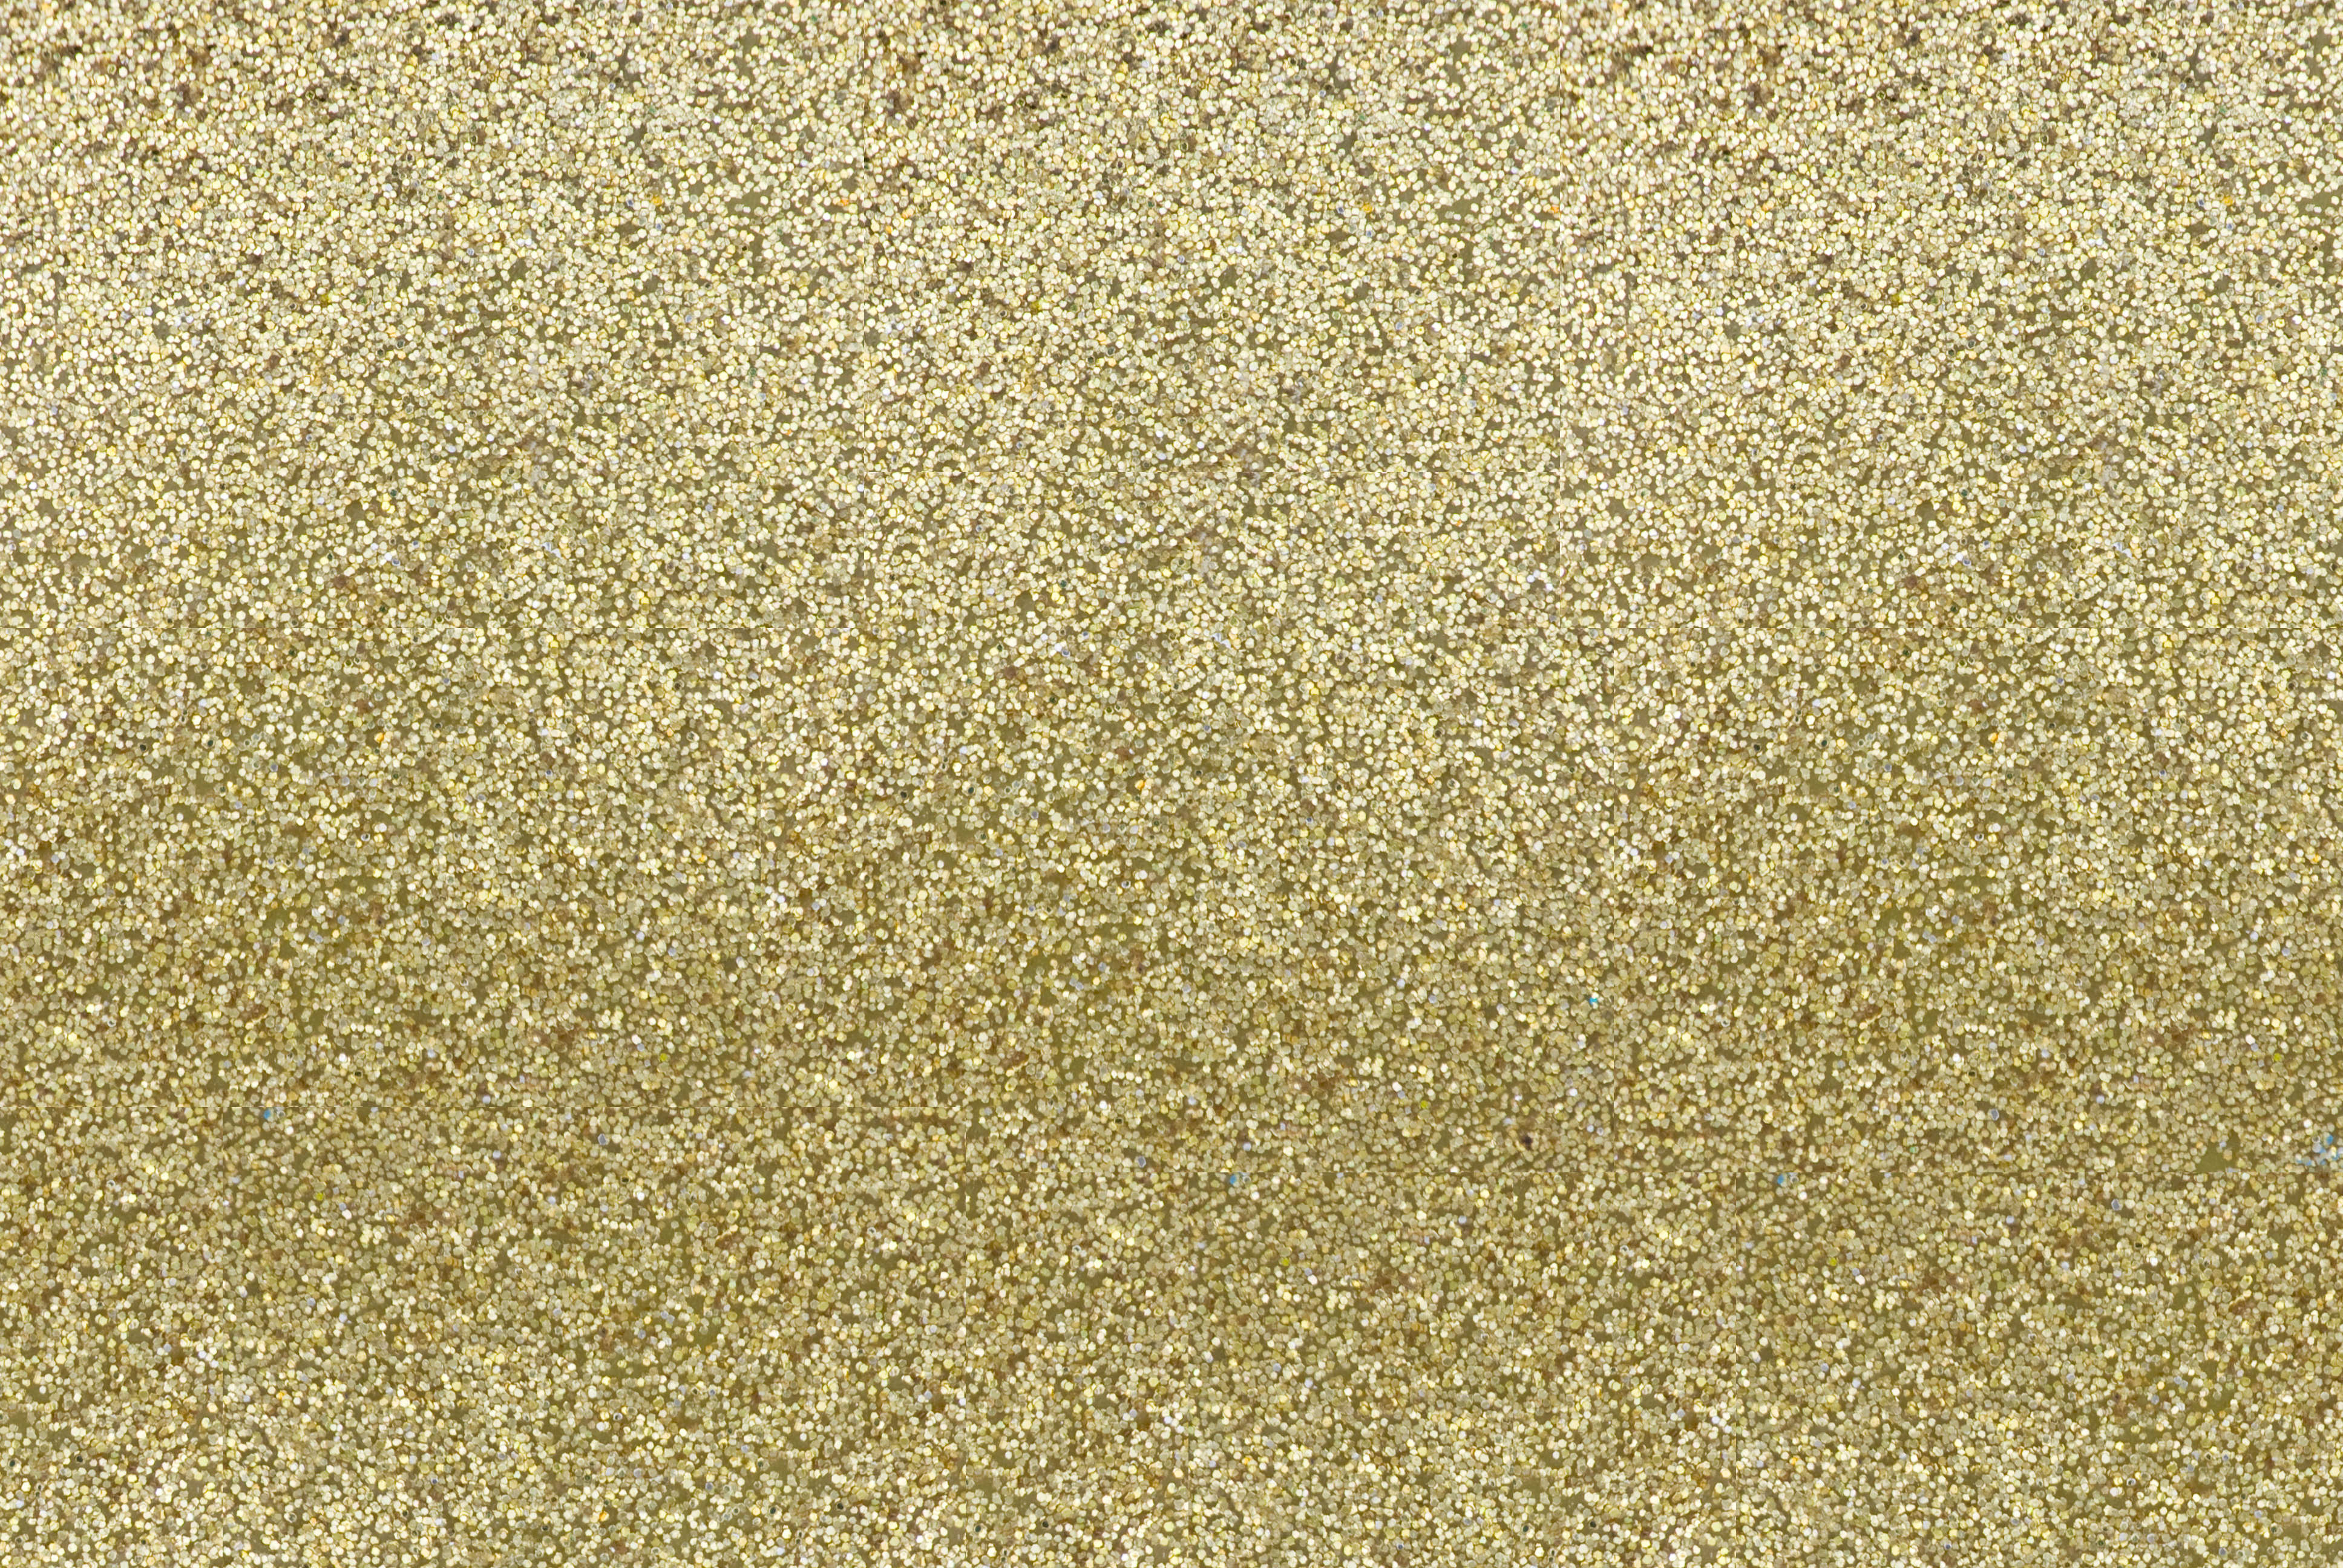 Free Gold Glitter Texture For Download